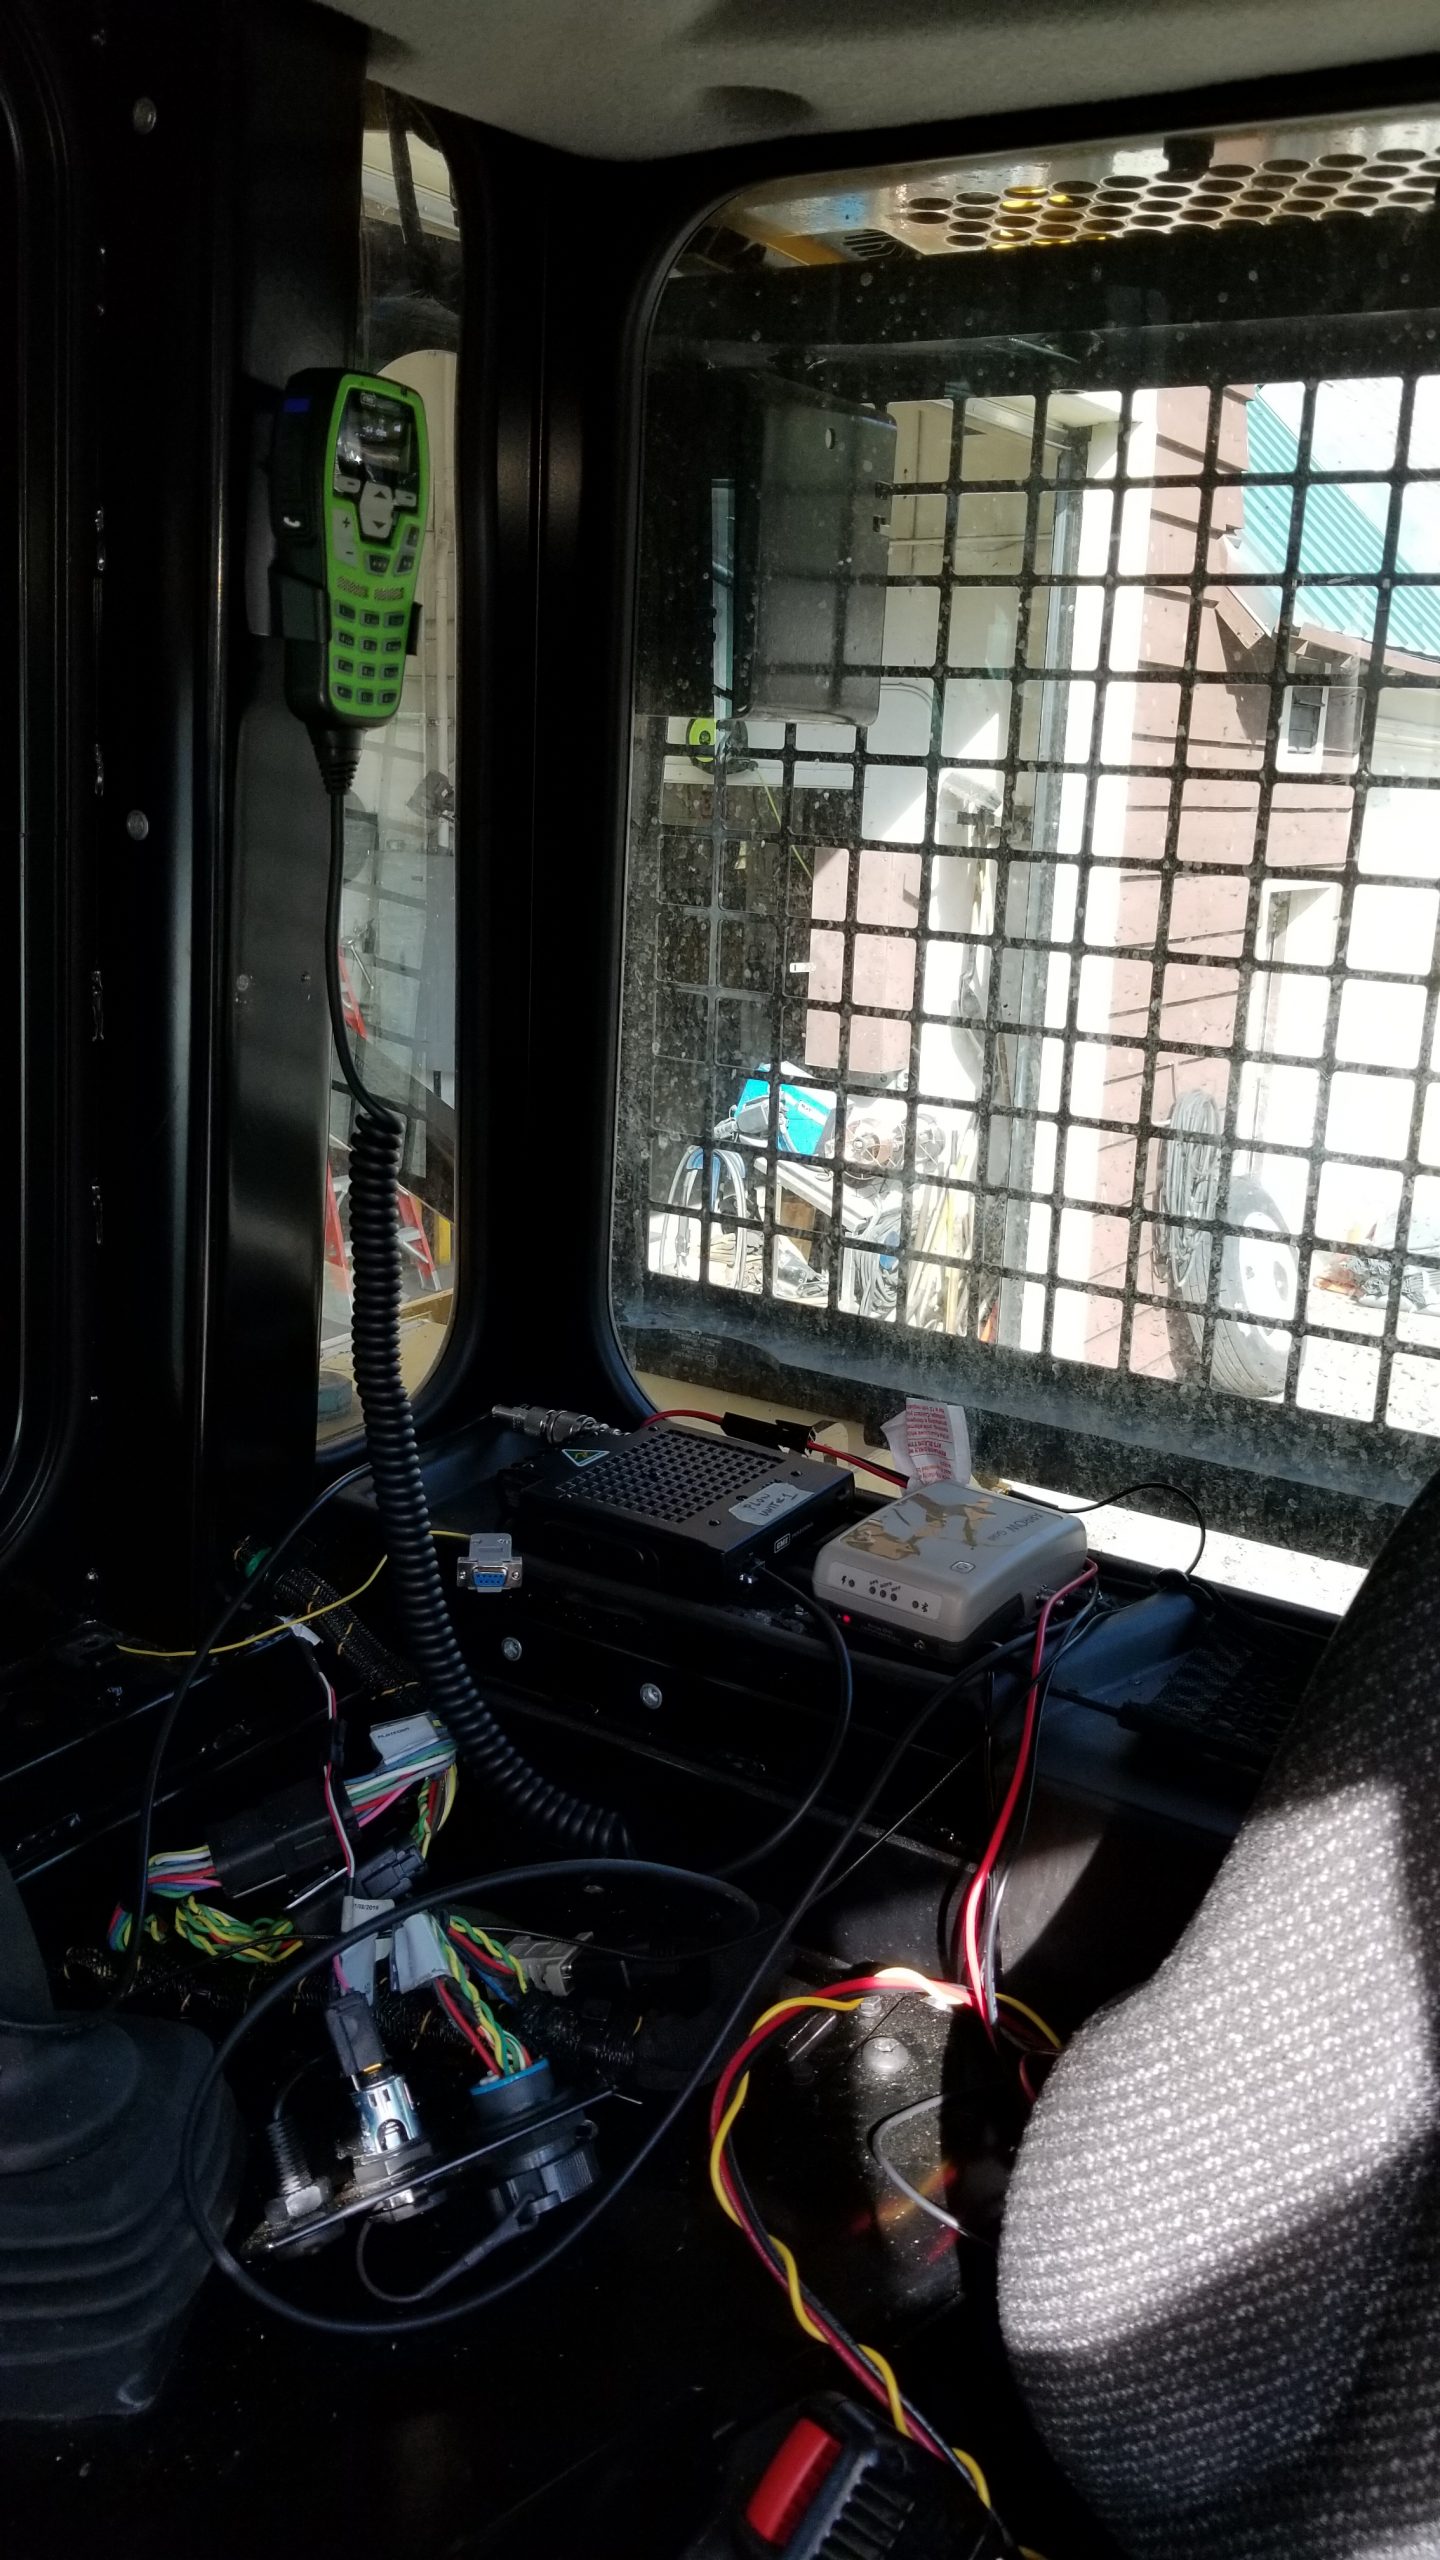 View of the Arrow Gold GNSS receiver inside the cab.